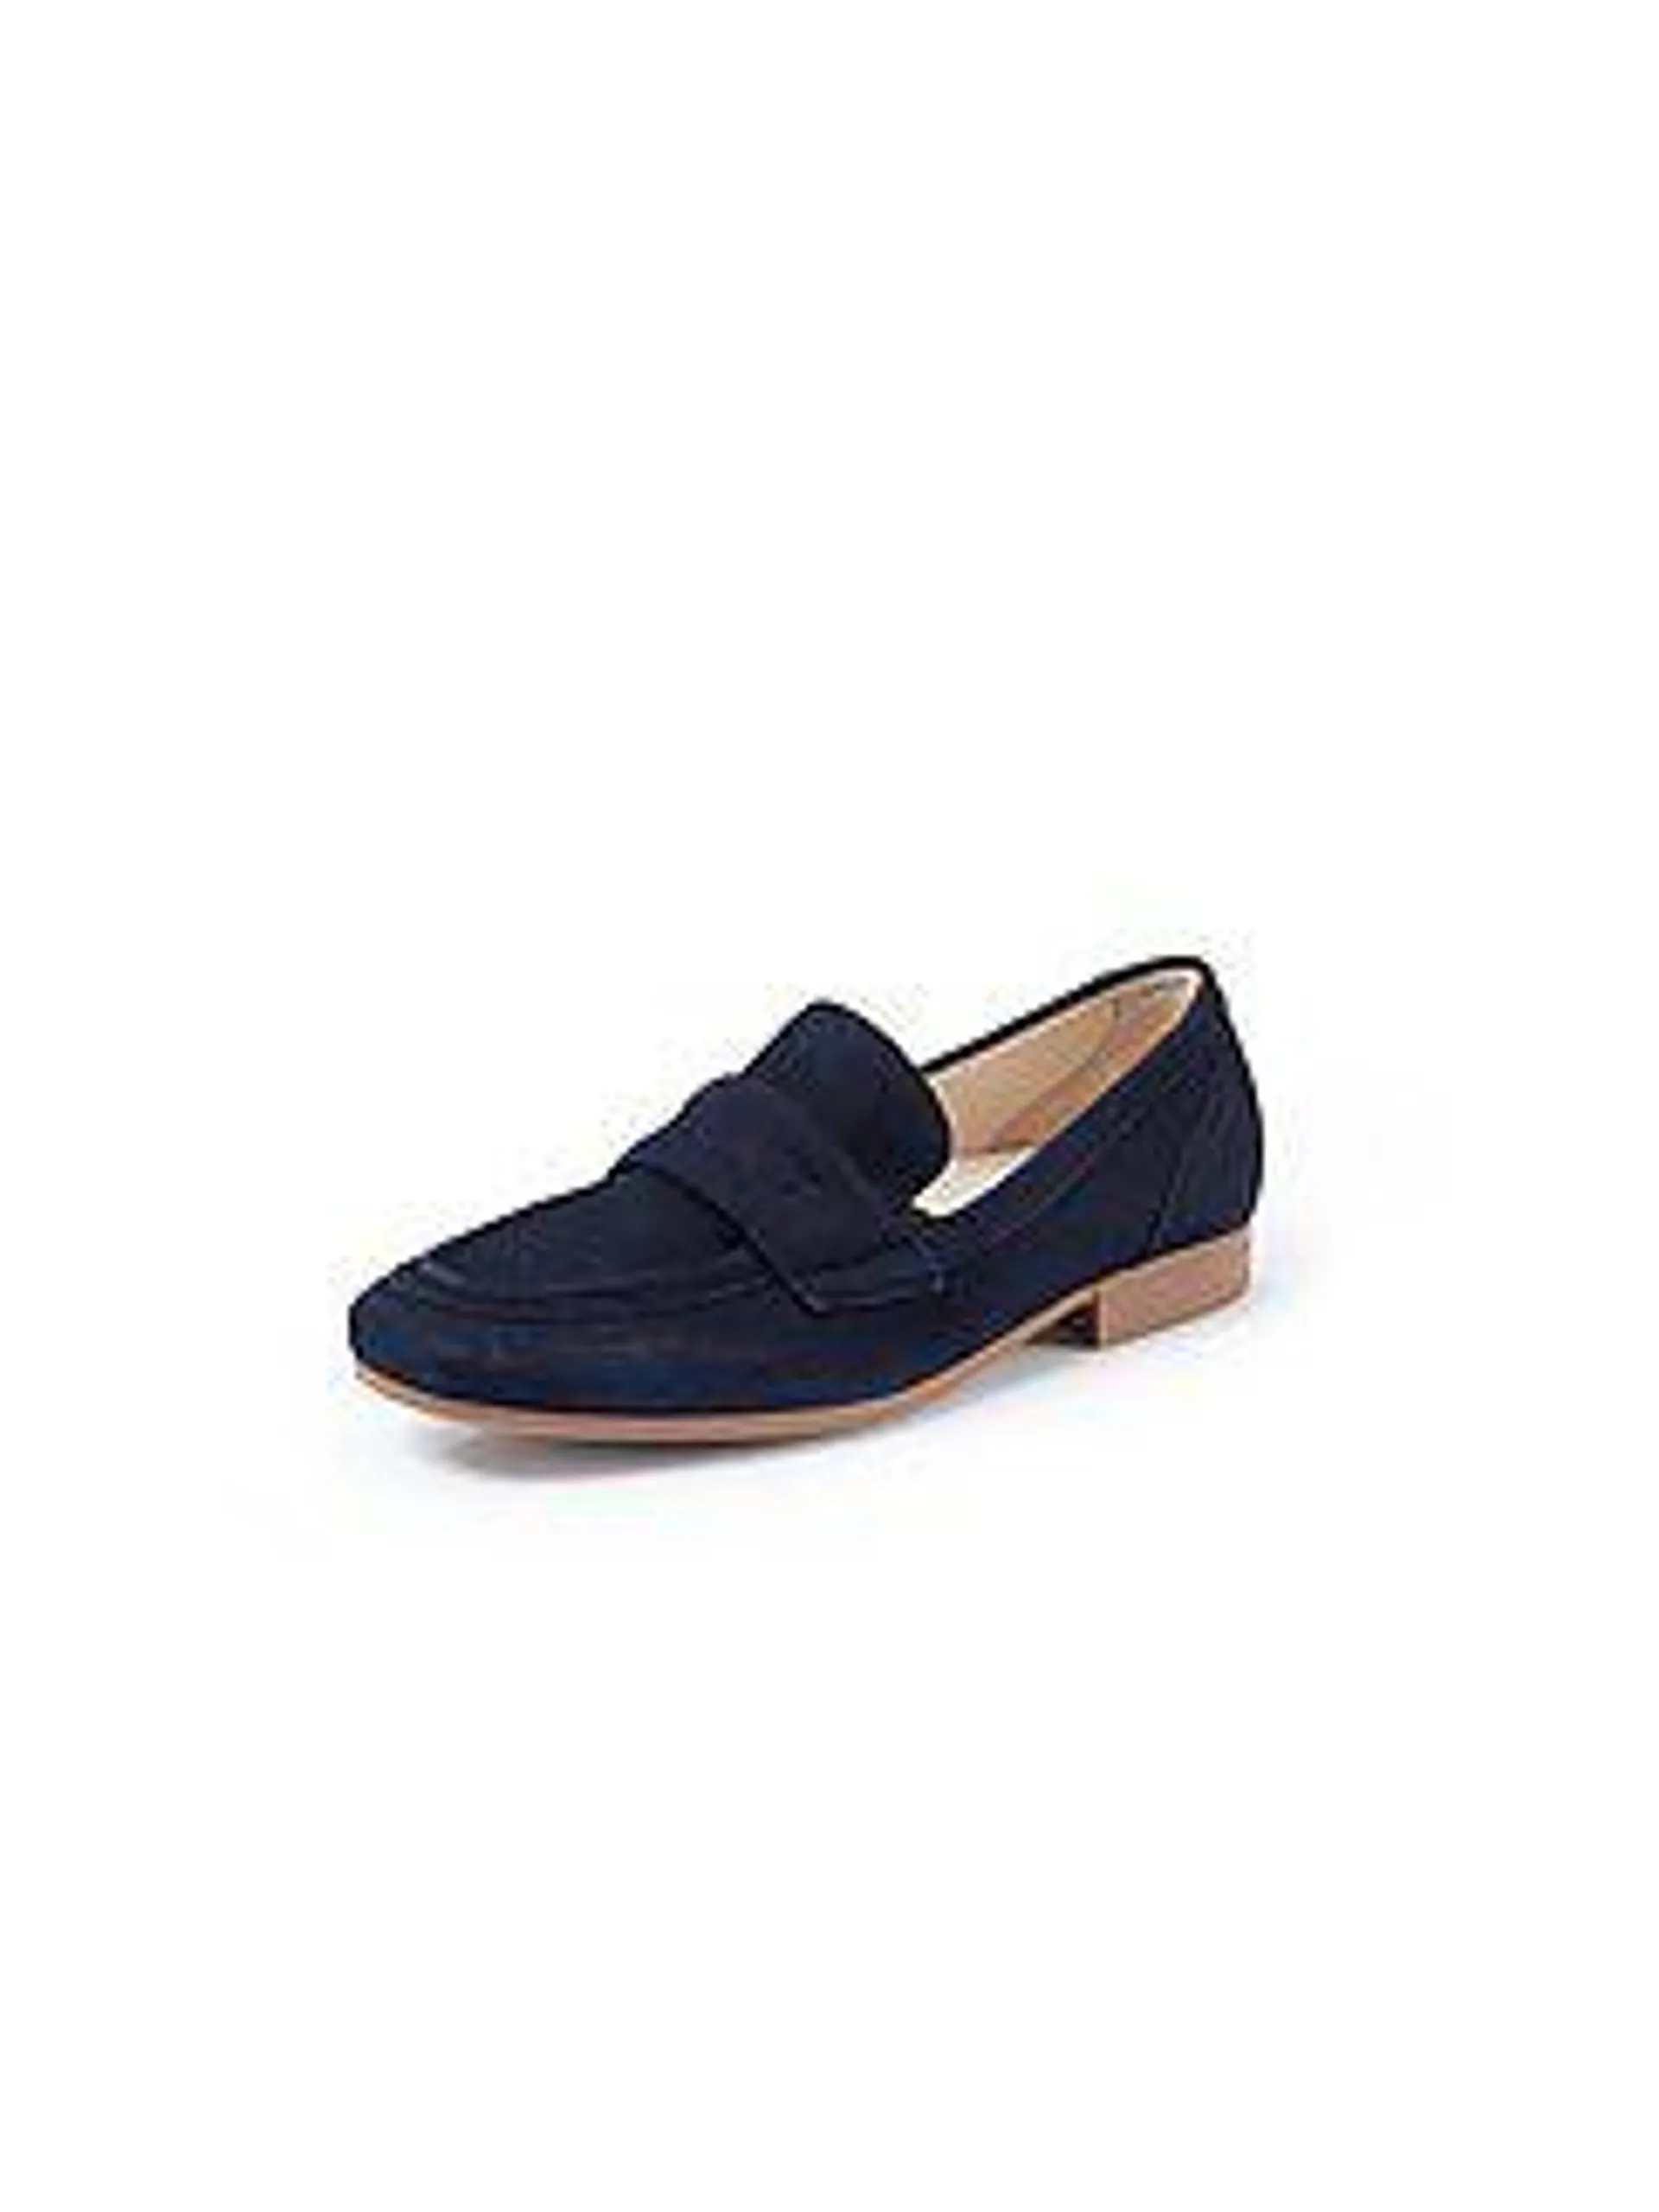 Loafers in kidskin suede